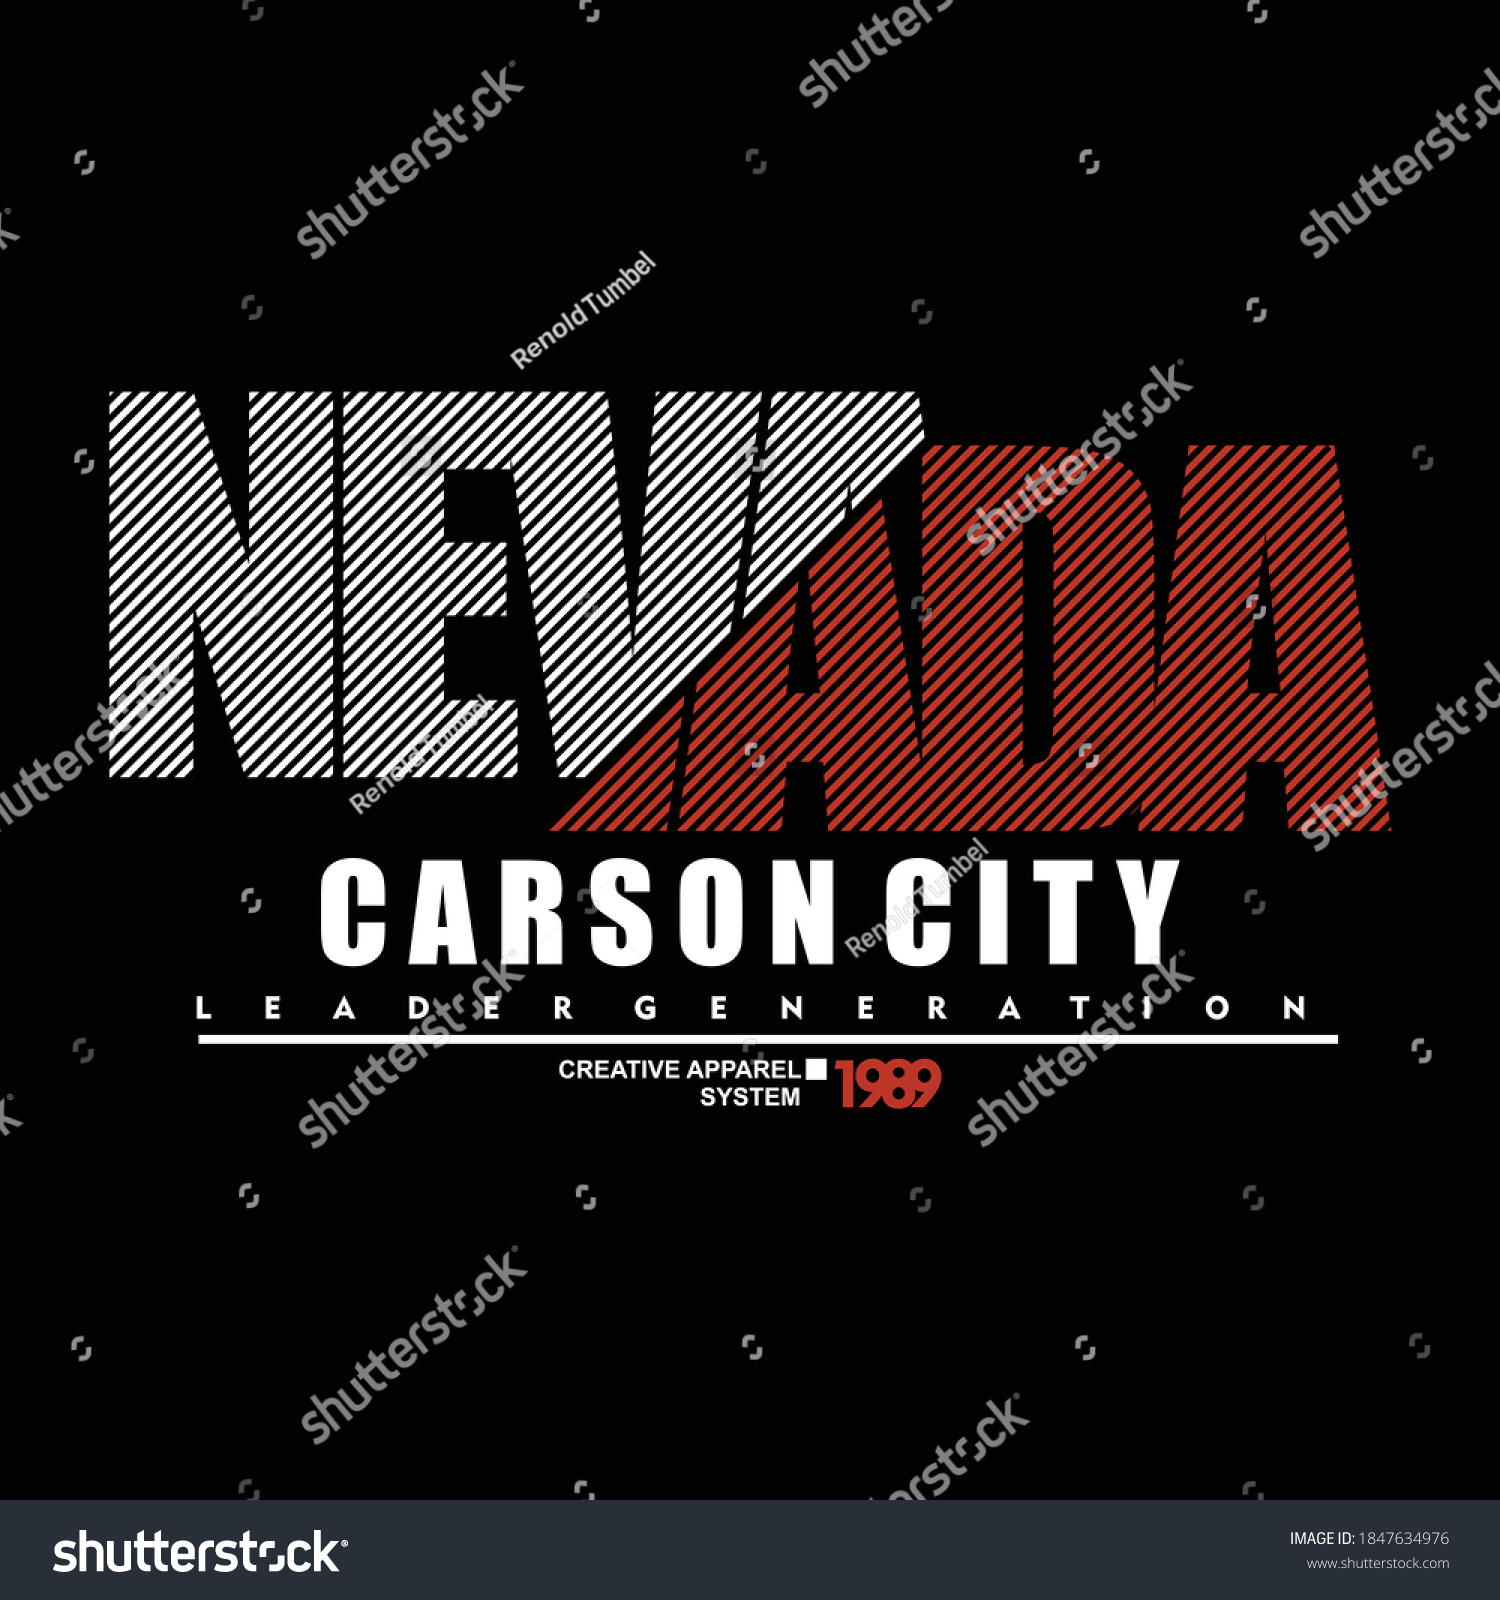 SVG of Graphic Nevada Carson city lettering vector Illustration, perfect for t-shirts design, clothing, hoodies, etc.
 svg